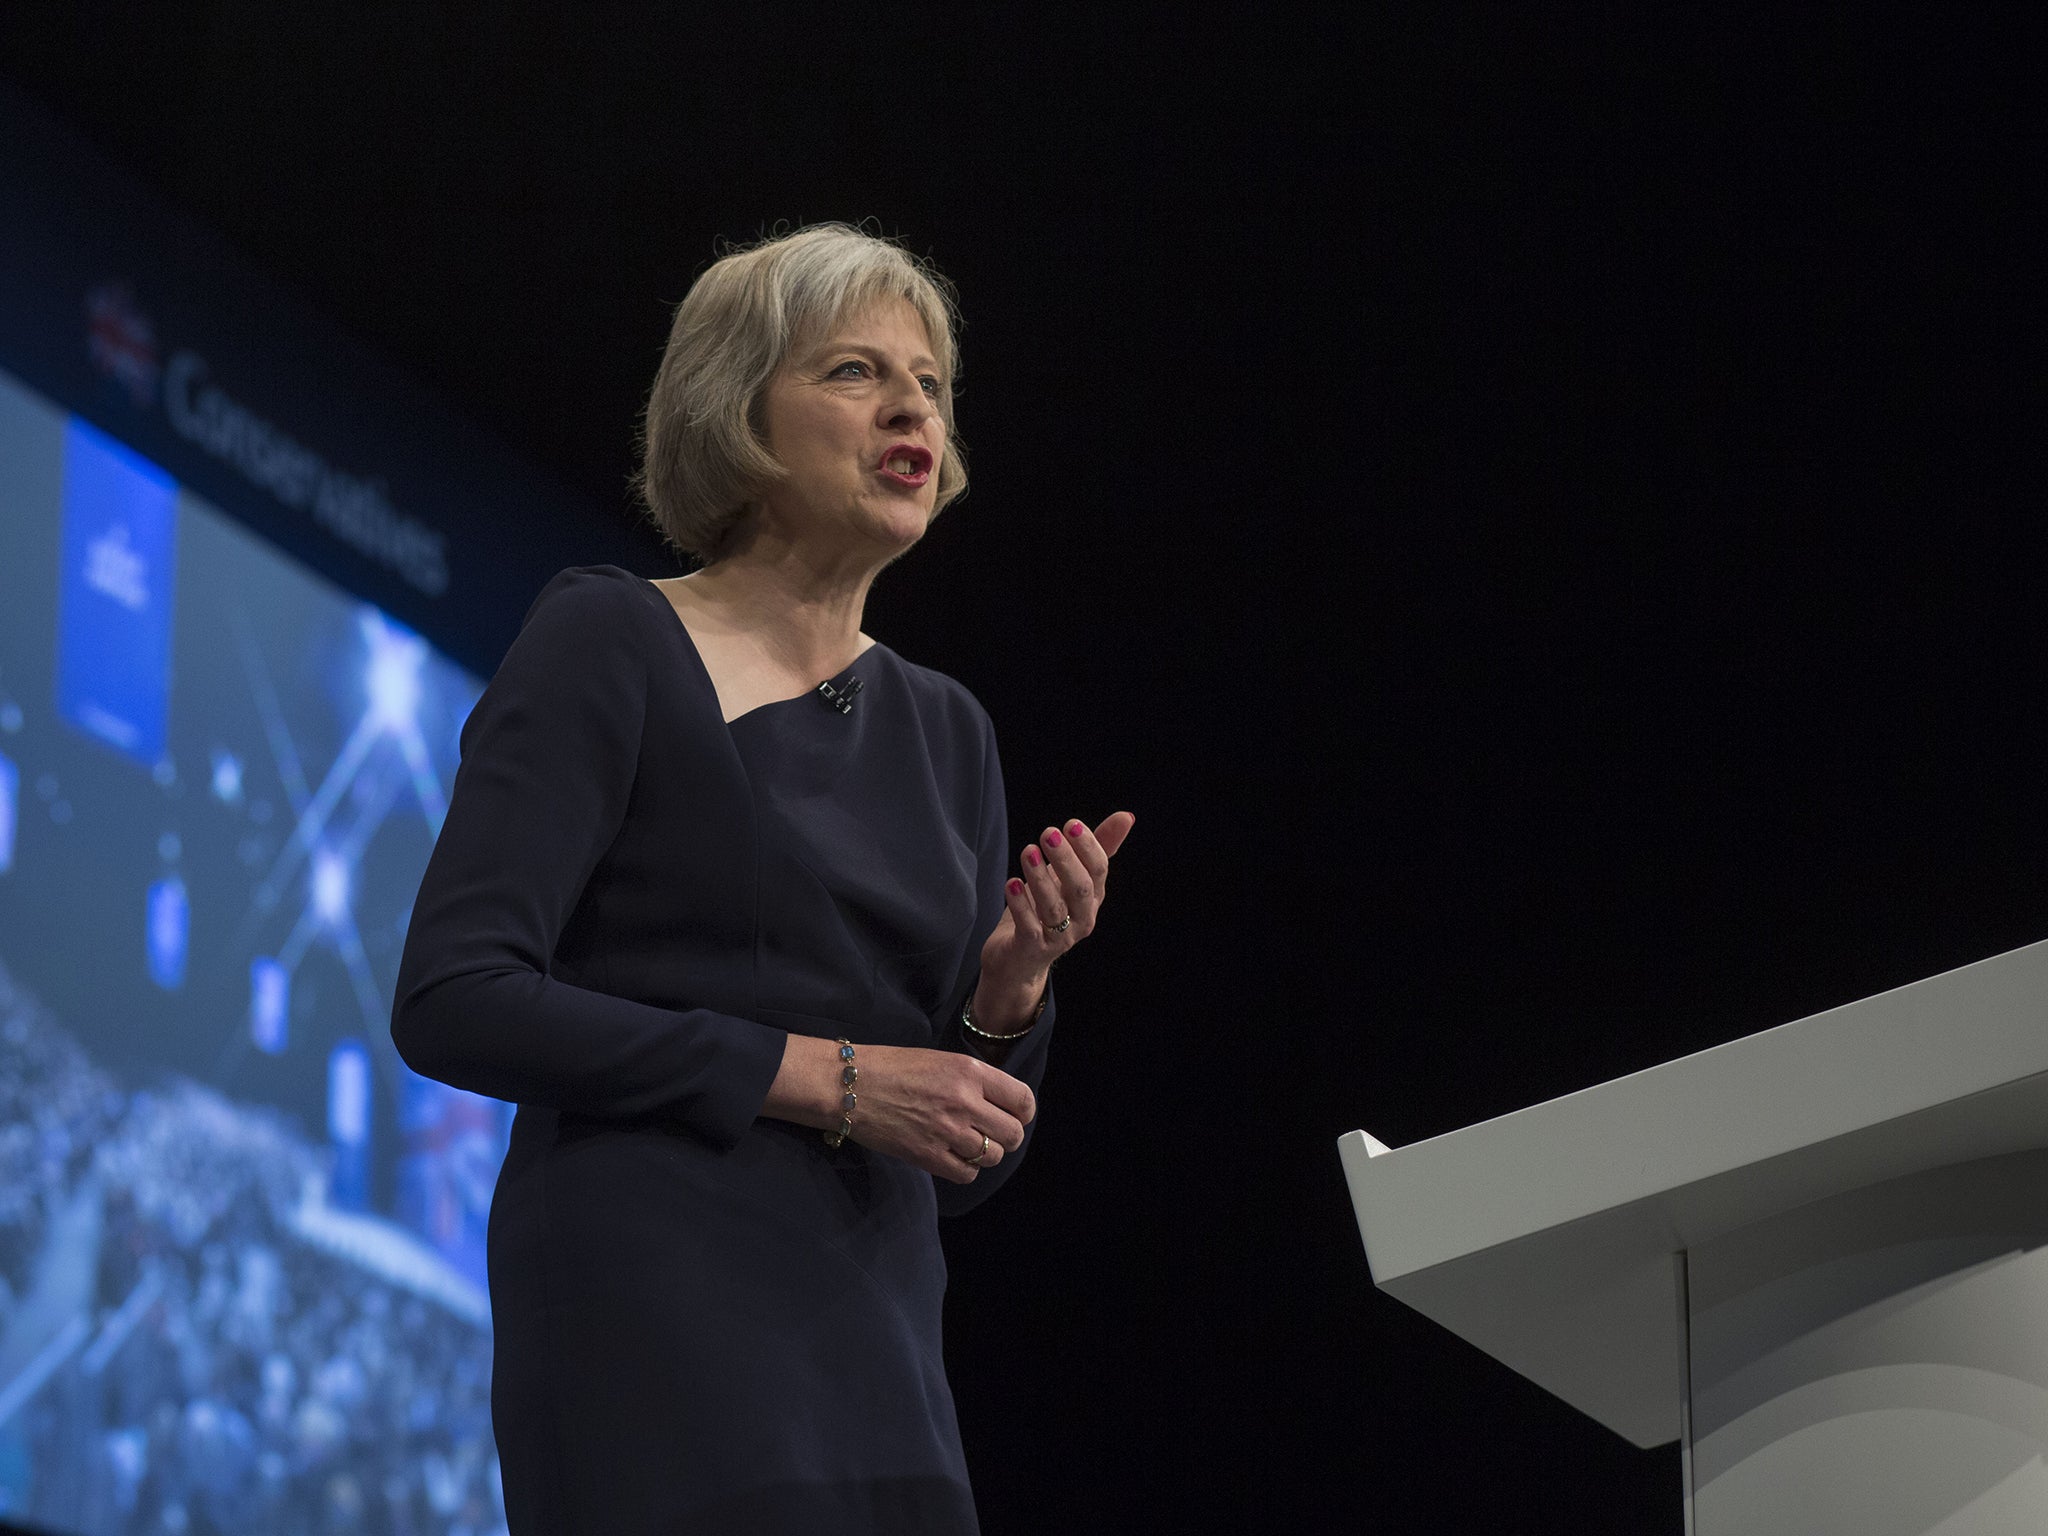 In her speech to Conference the Home Secretary, Theresa May, said that Britain did not need large numbers of migrant workers